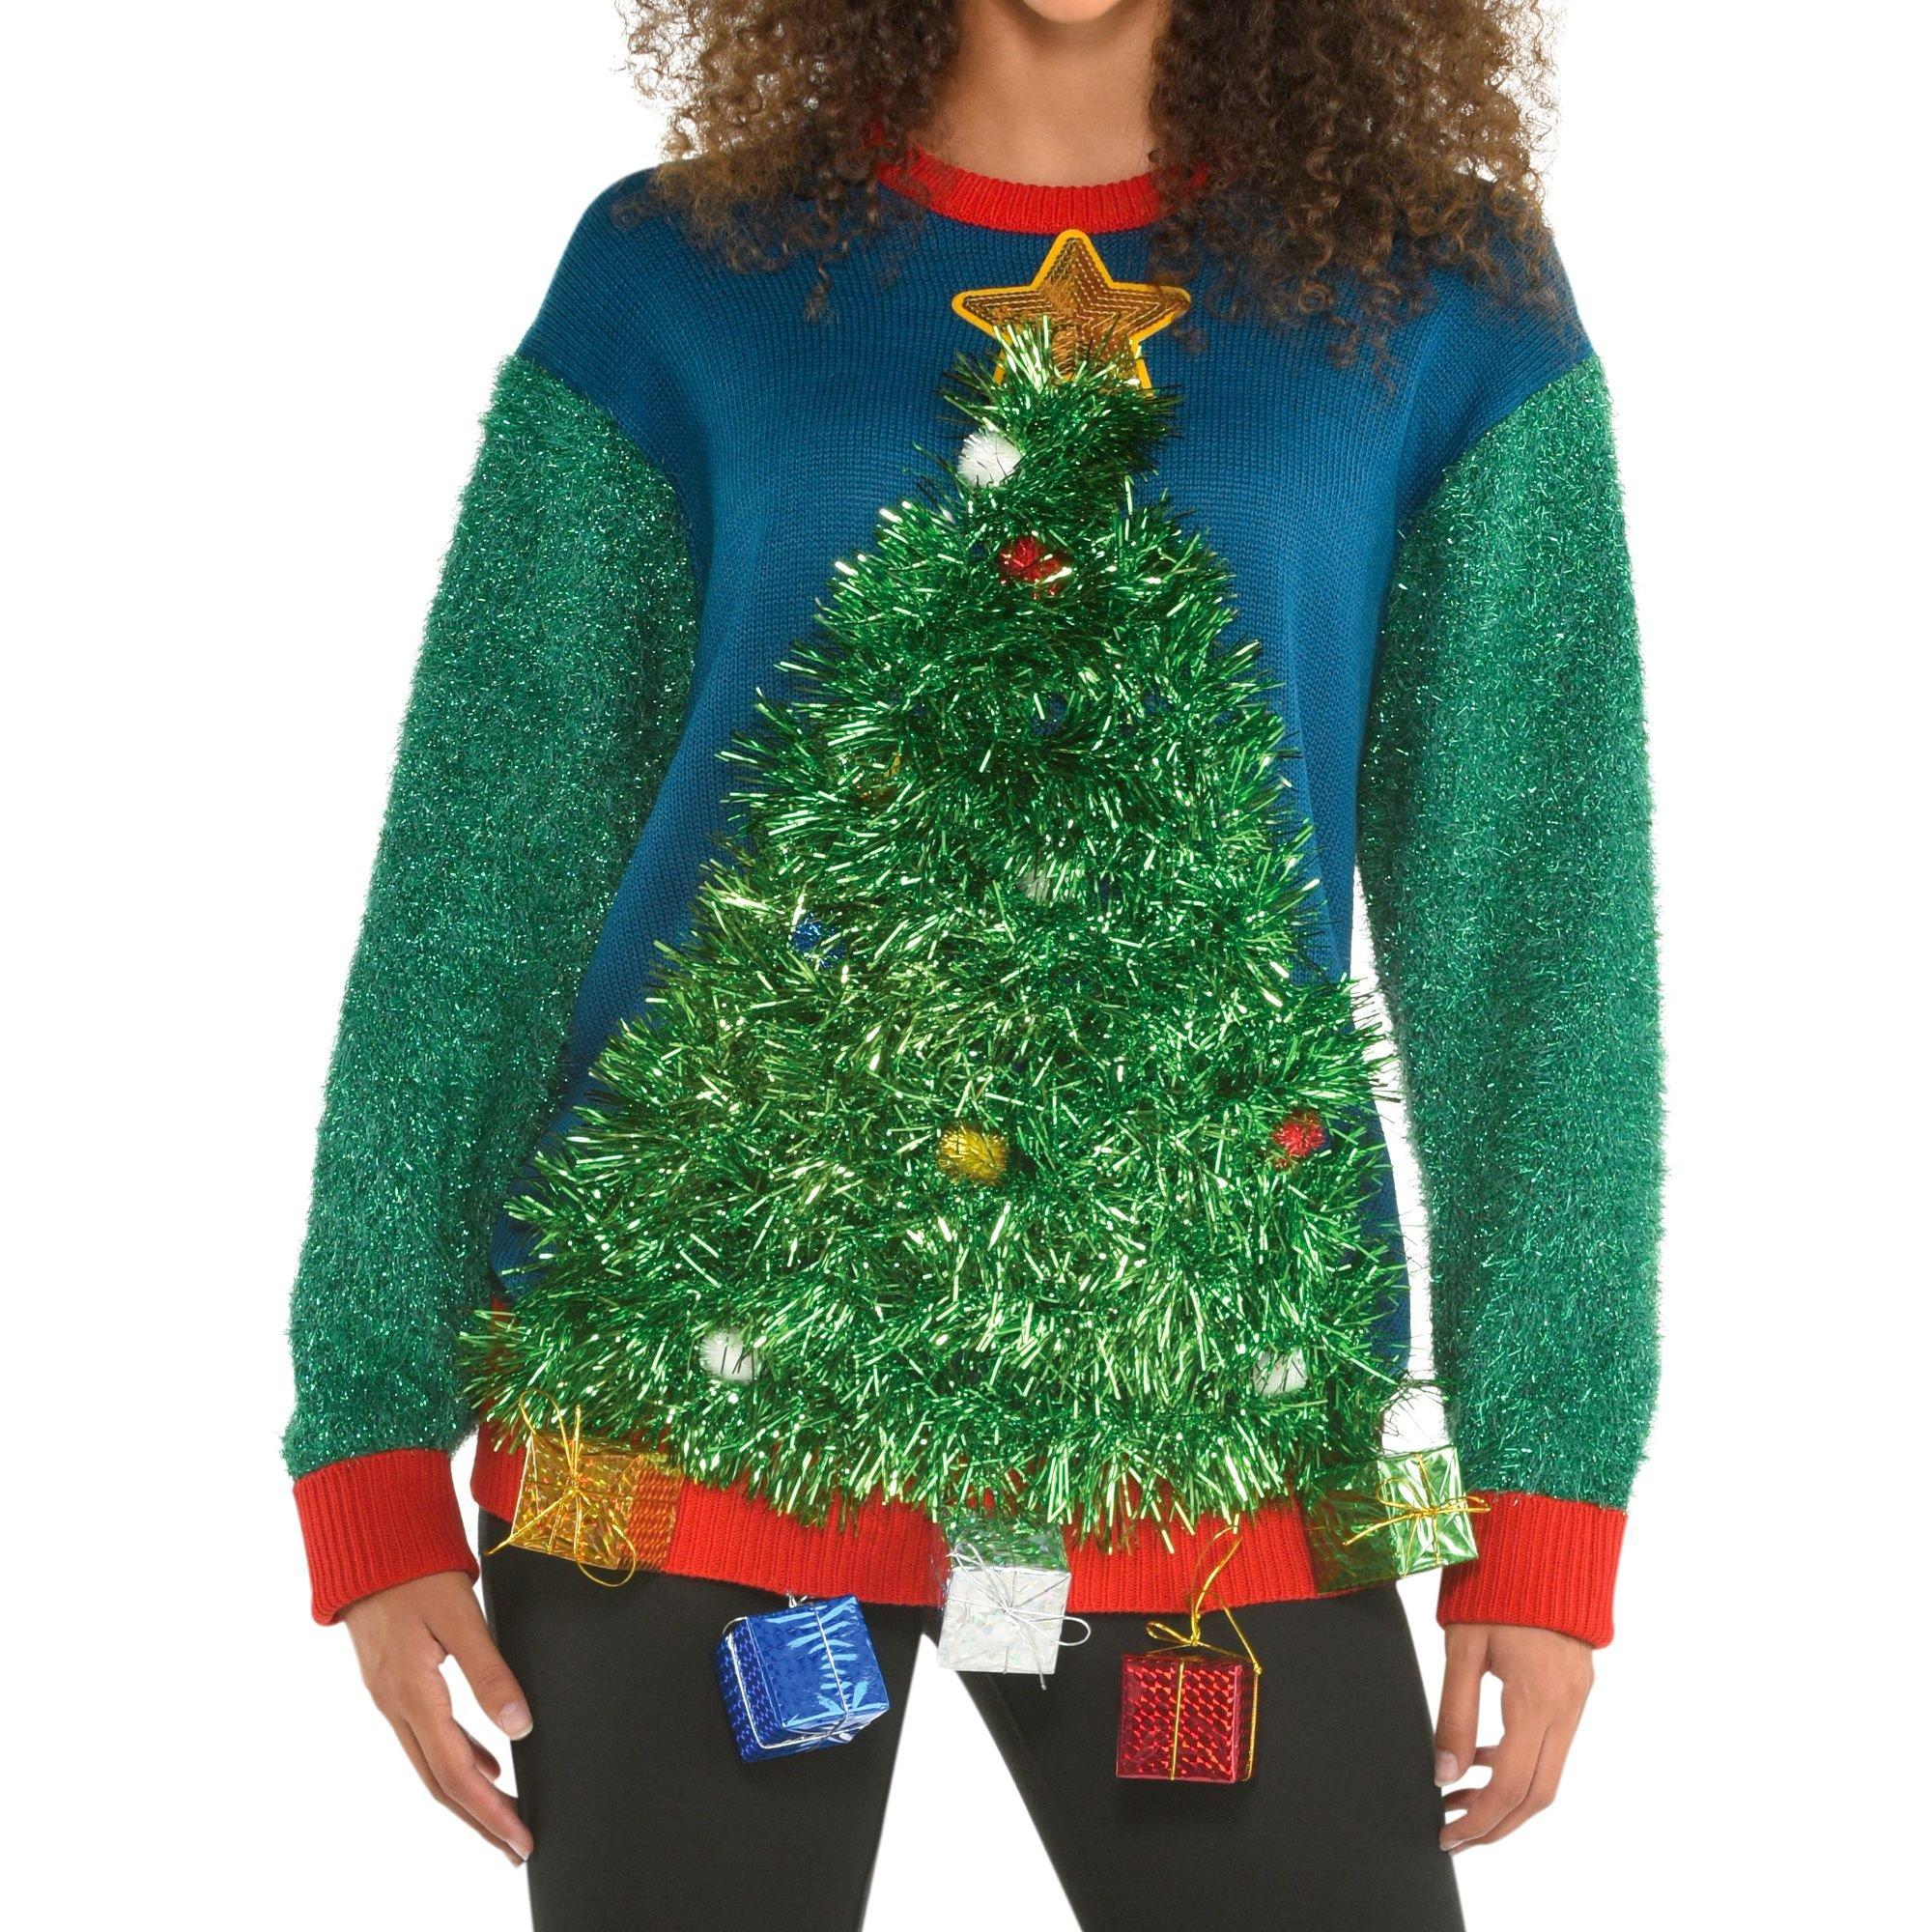 Ugliest Christmas Sweaters Ever, Hideous Christmas Sweaters